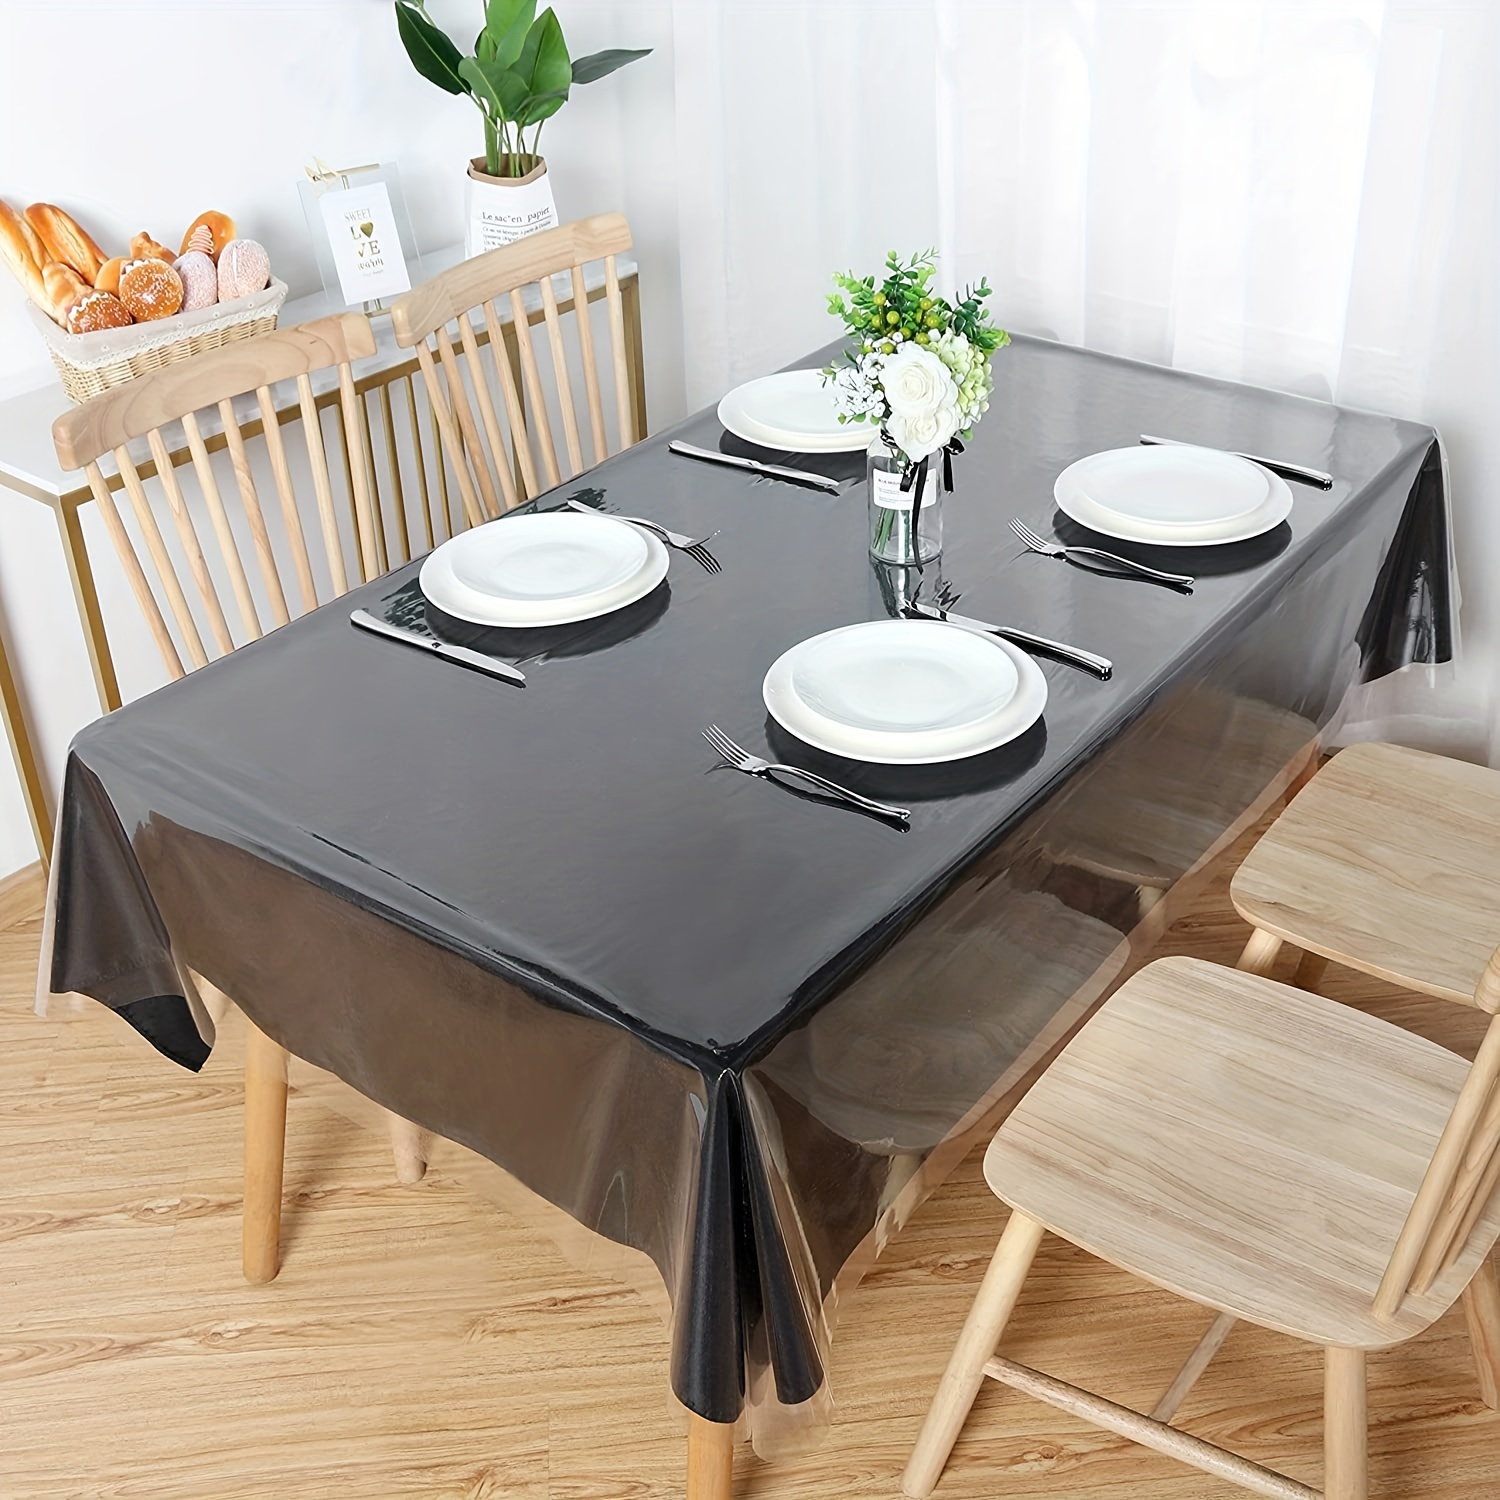 Waterproof Pvc Tablecloth, Oil Proof And Spill Proof Vinyl Table